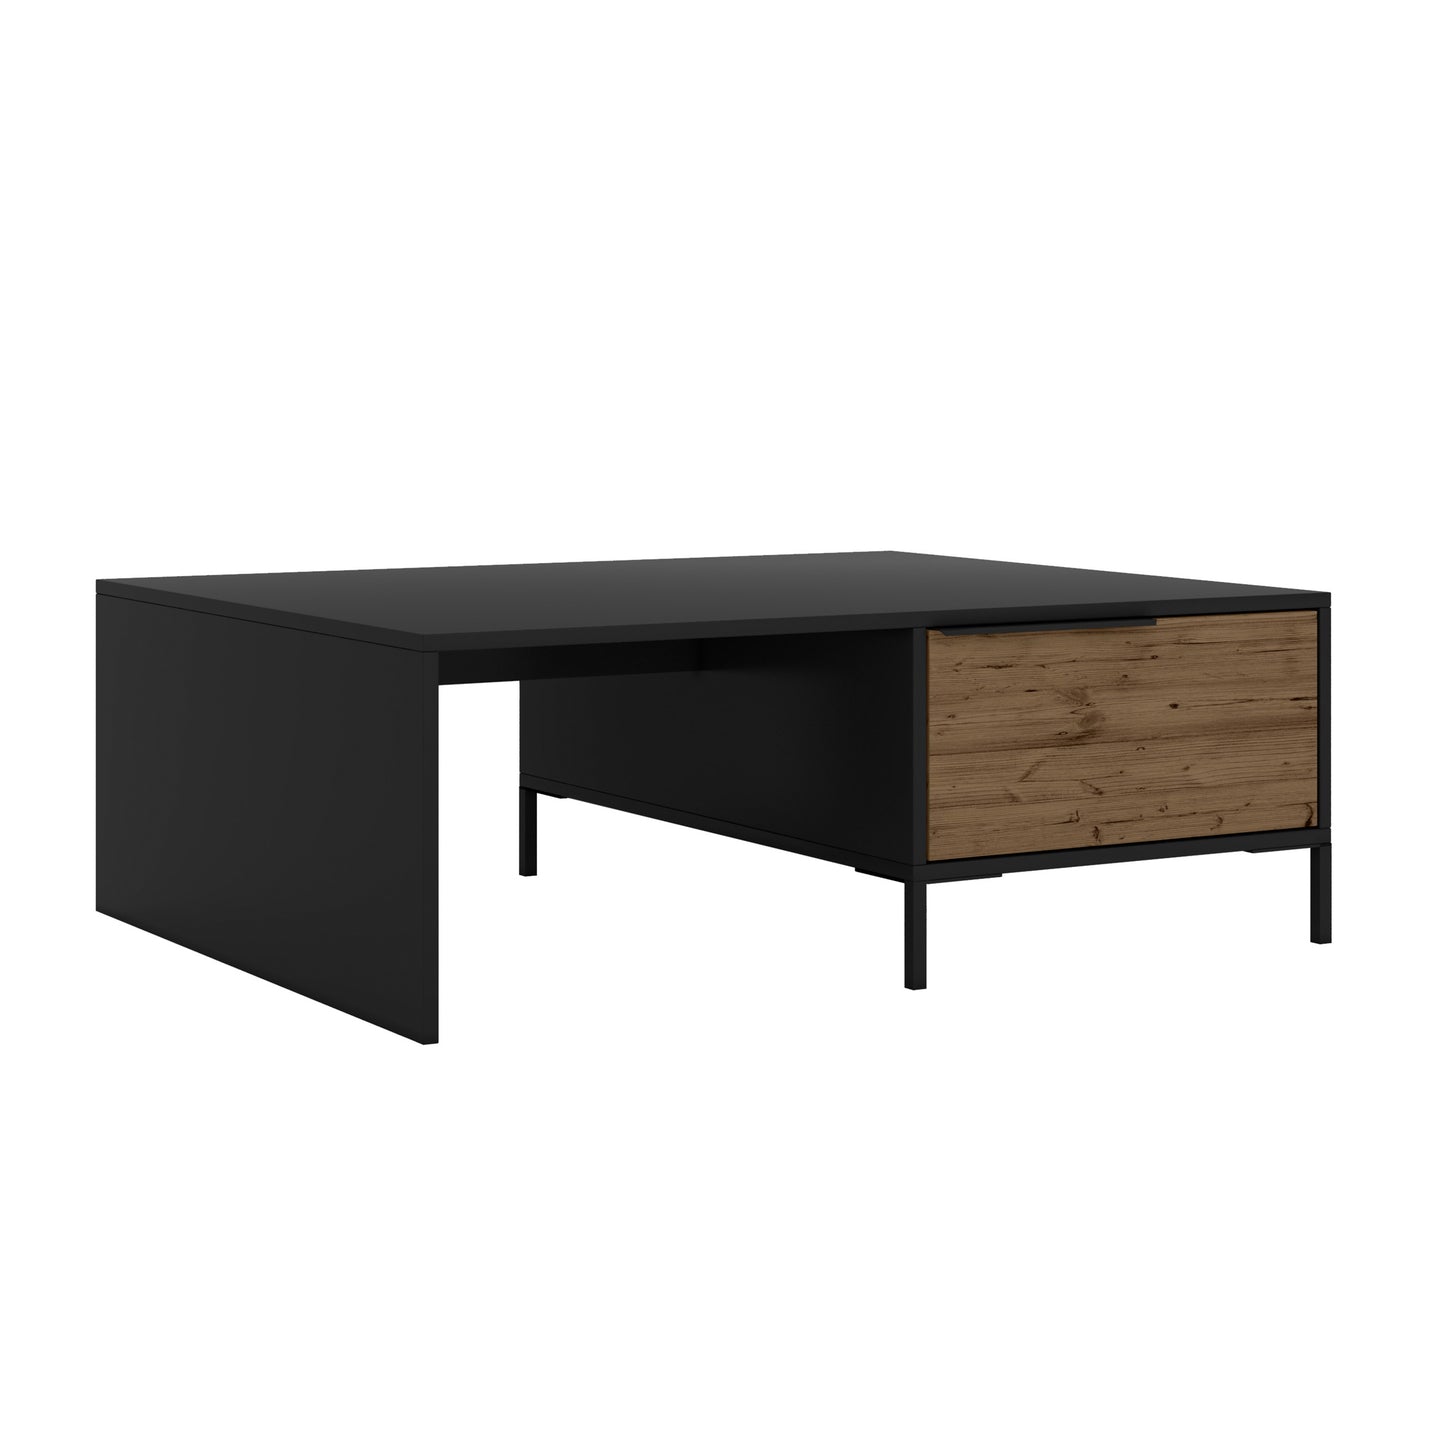 Rectangular Wood and Metal Coffee Table with Storage Drawer, Black and Brown